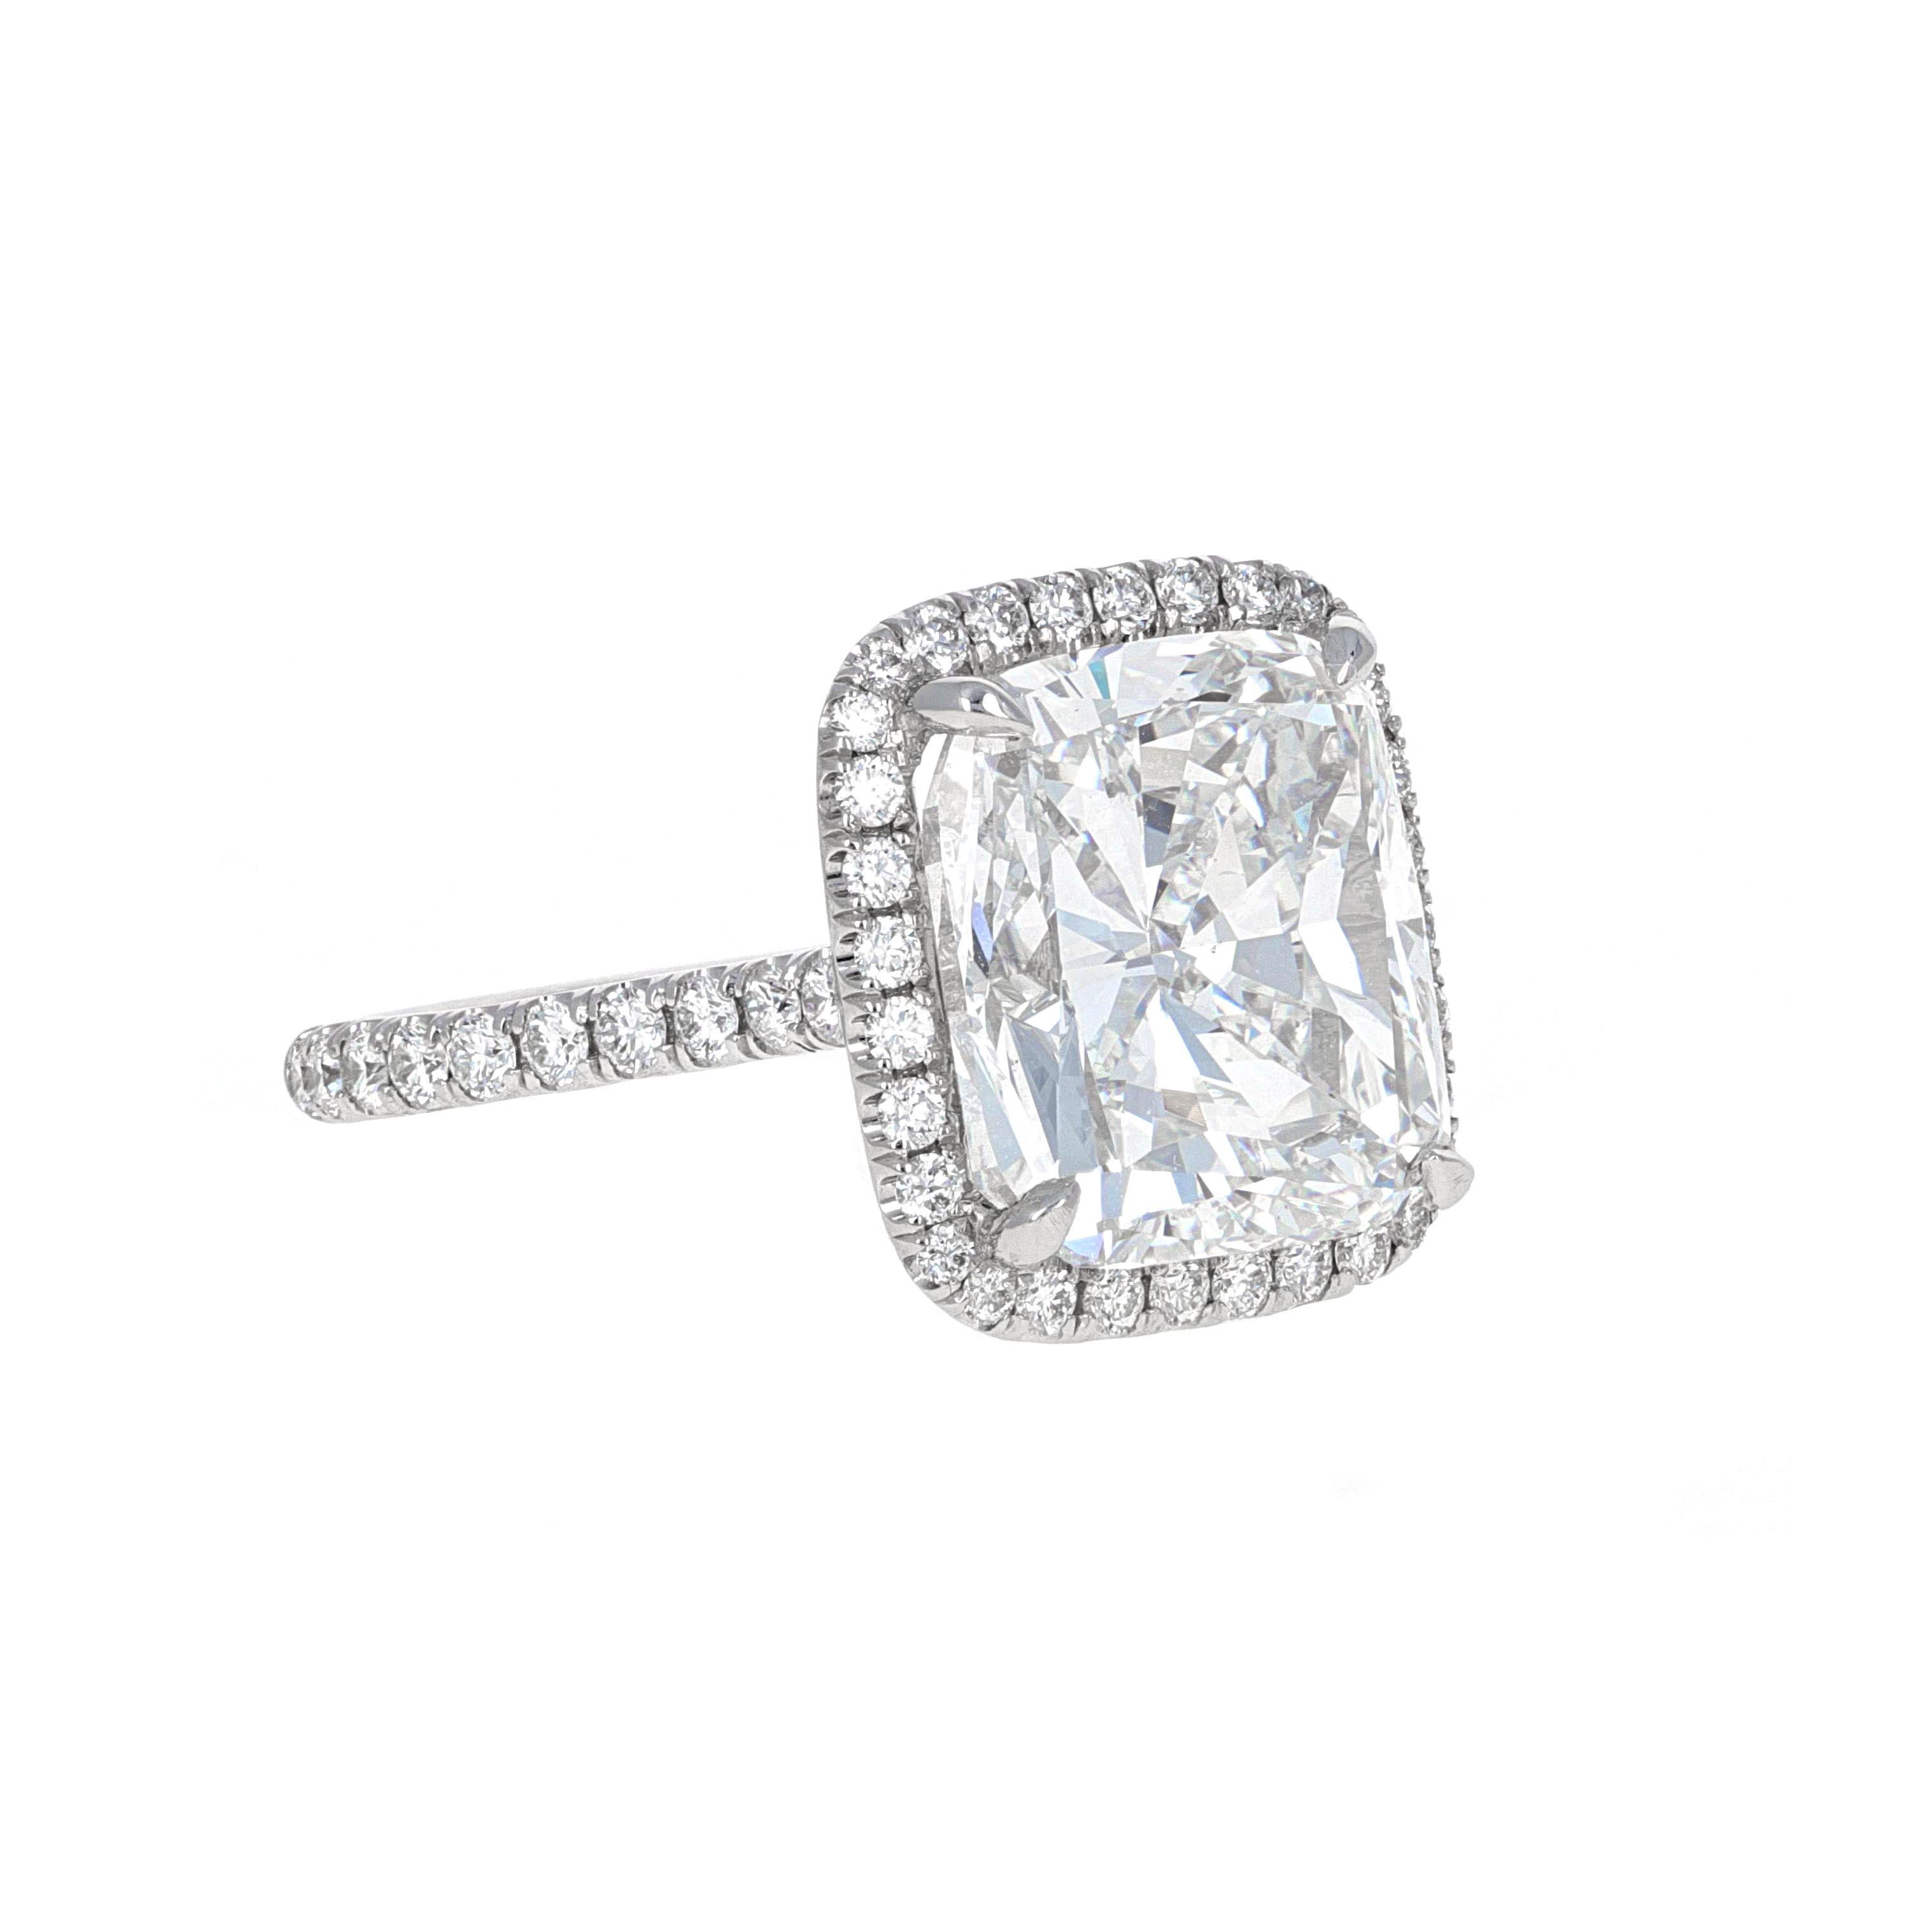 This 10.01 carat diamond cushion modified brilliant Engagement Ring is GIA certified. GIA describes the center stone as a Cushion Modified Brilliant. The stone measures 12.72 x 11.33 x 8.21 mm. The color grade is an 